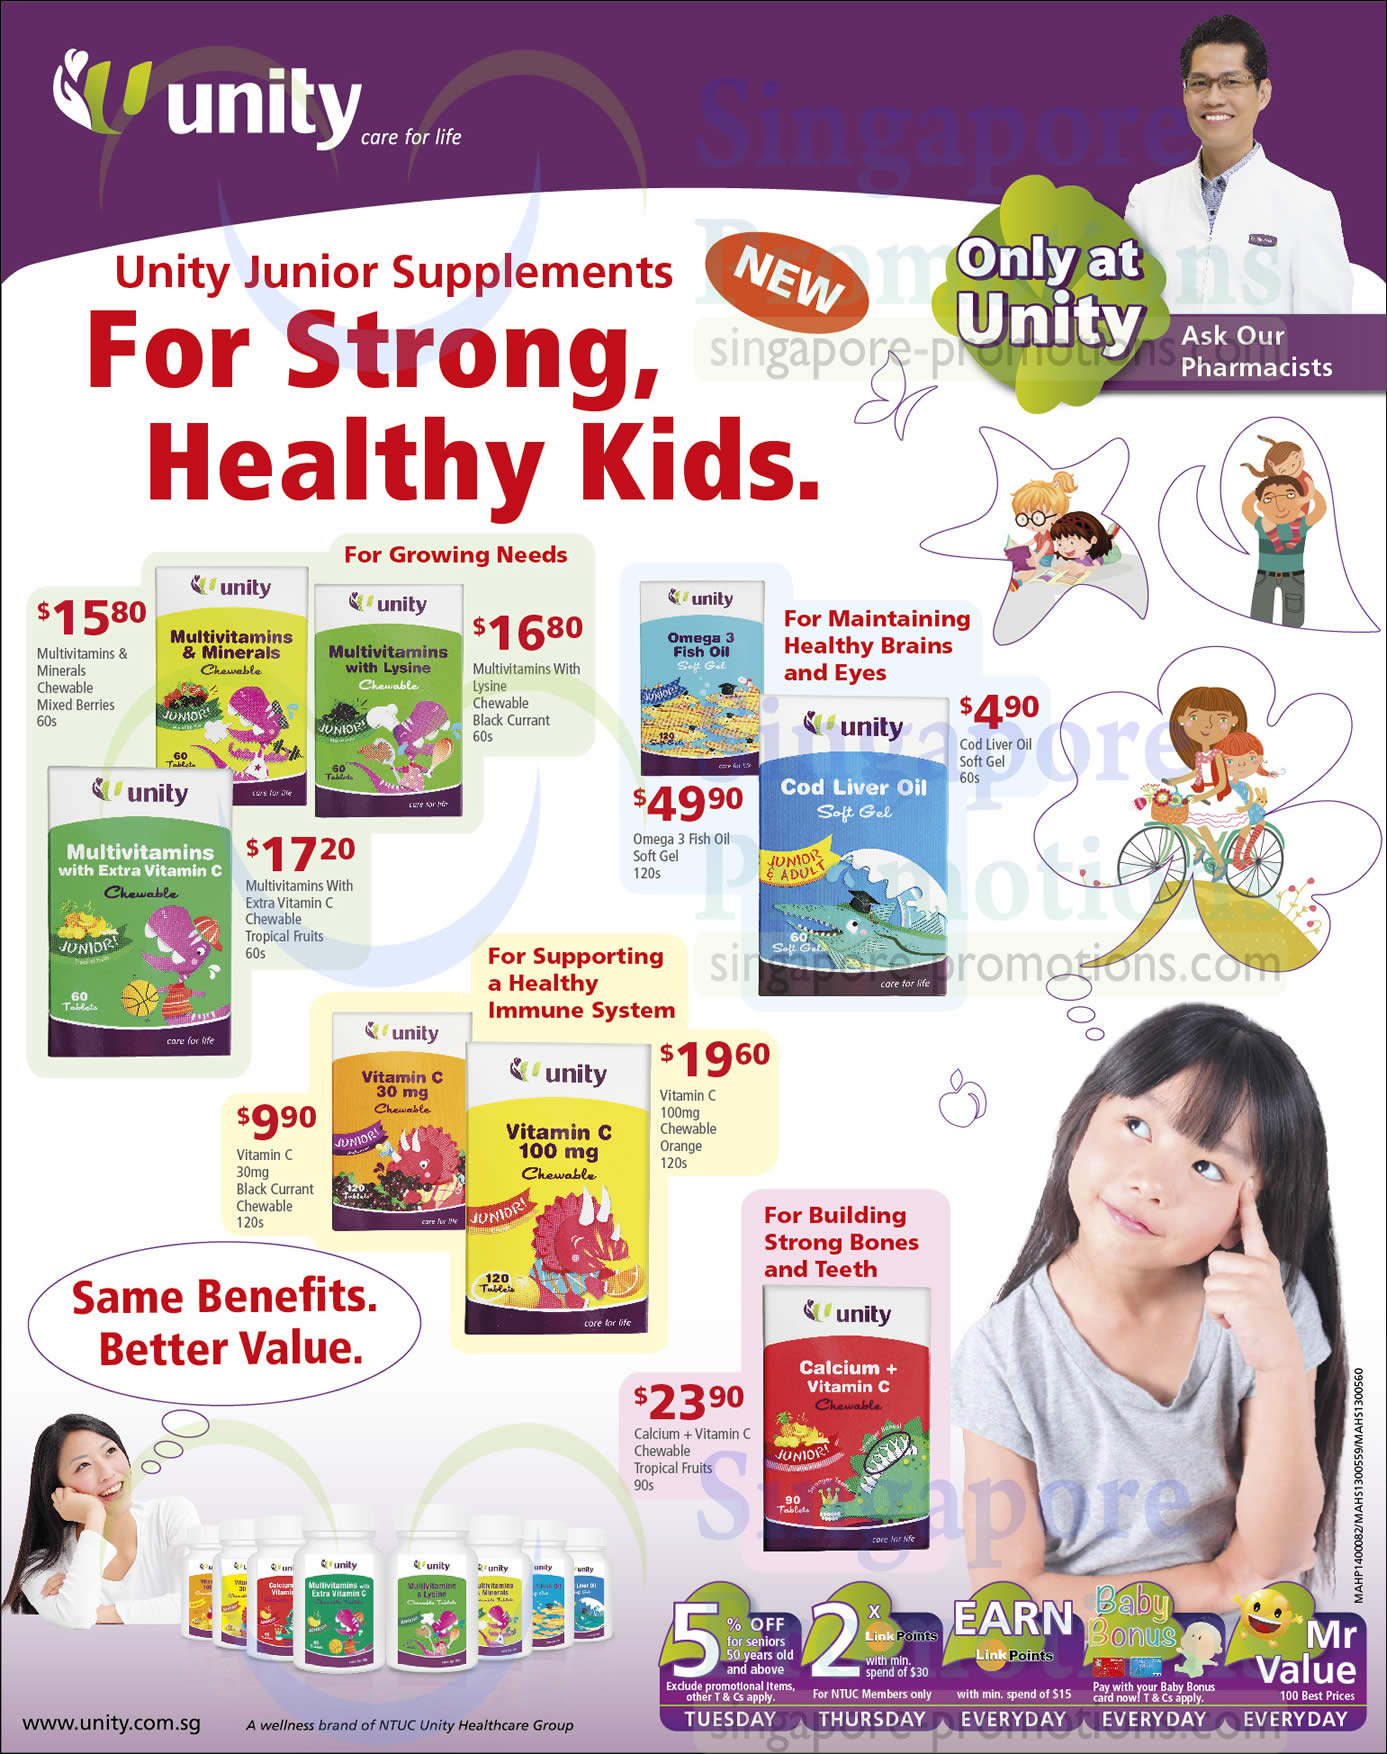 Featured image for NTUC Unity Health Offers & Promotions 21 Feb - 27 Mar 2014